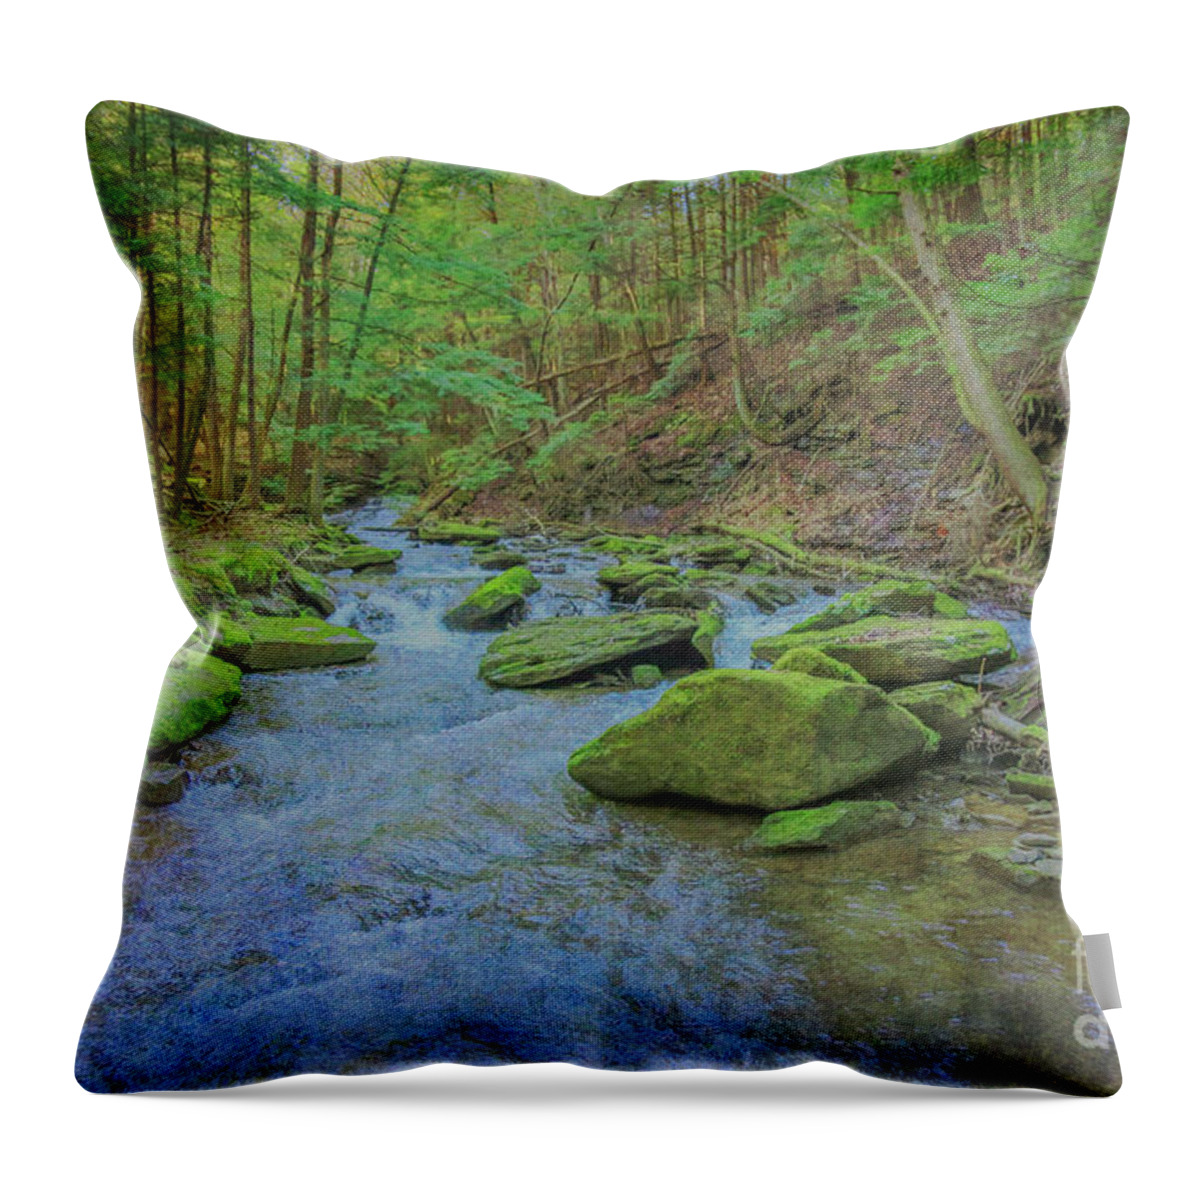 Enchanted Forest Three Throw Pillow featuring the digital art Enchanted Forest Three by Randy Steele